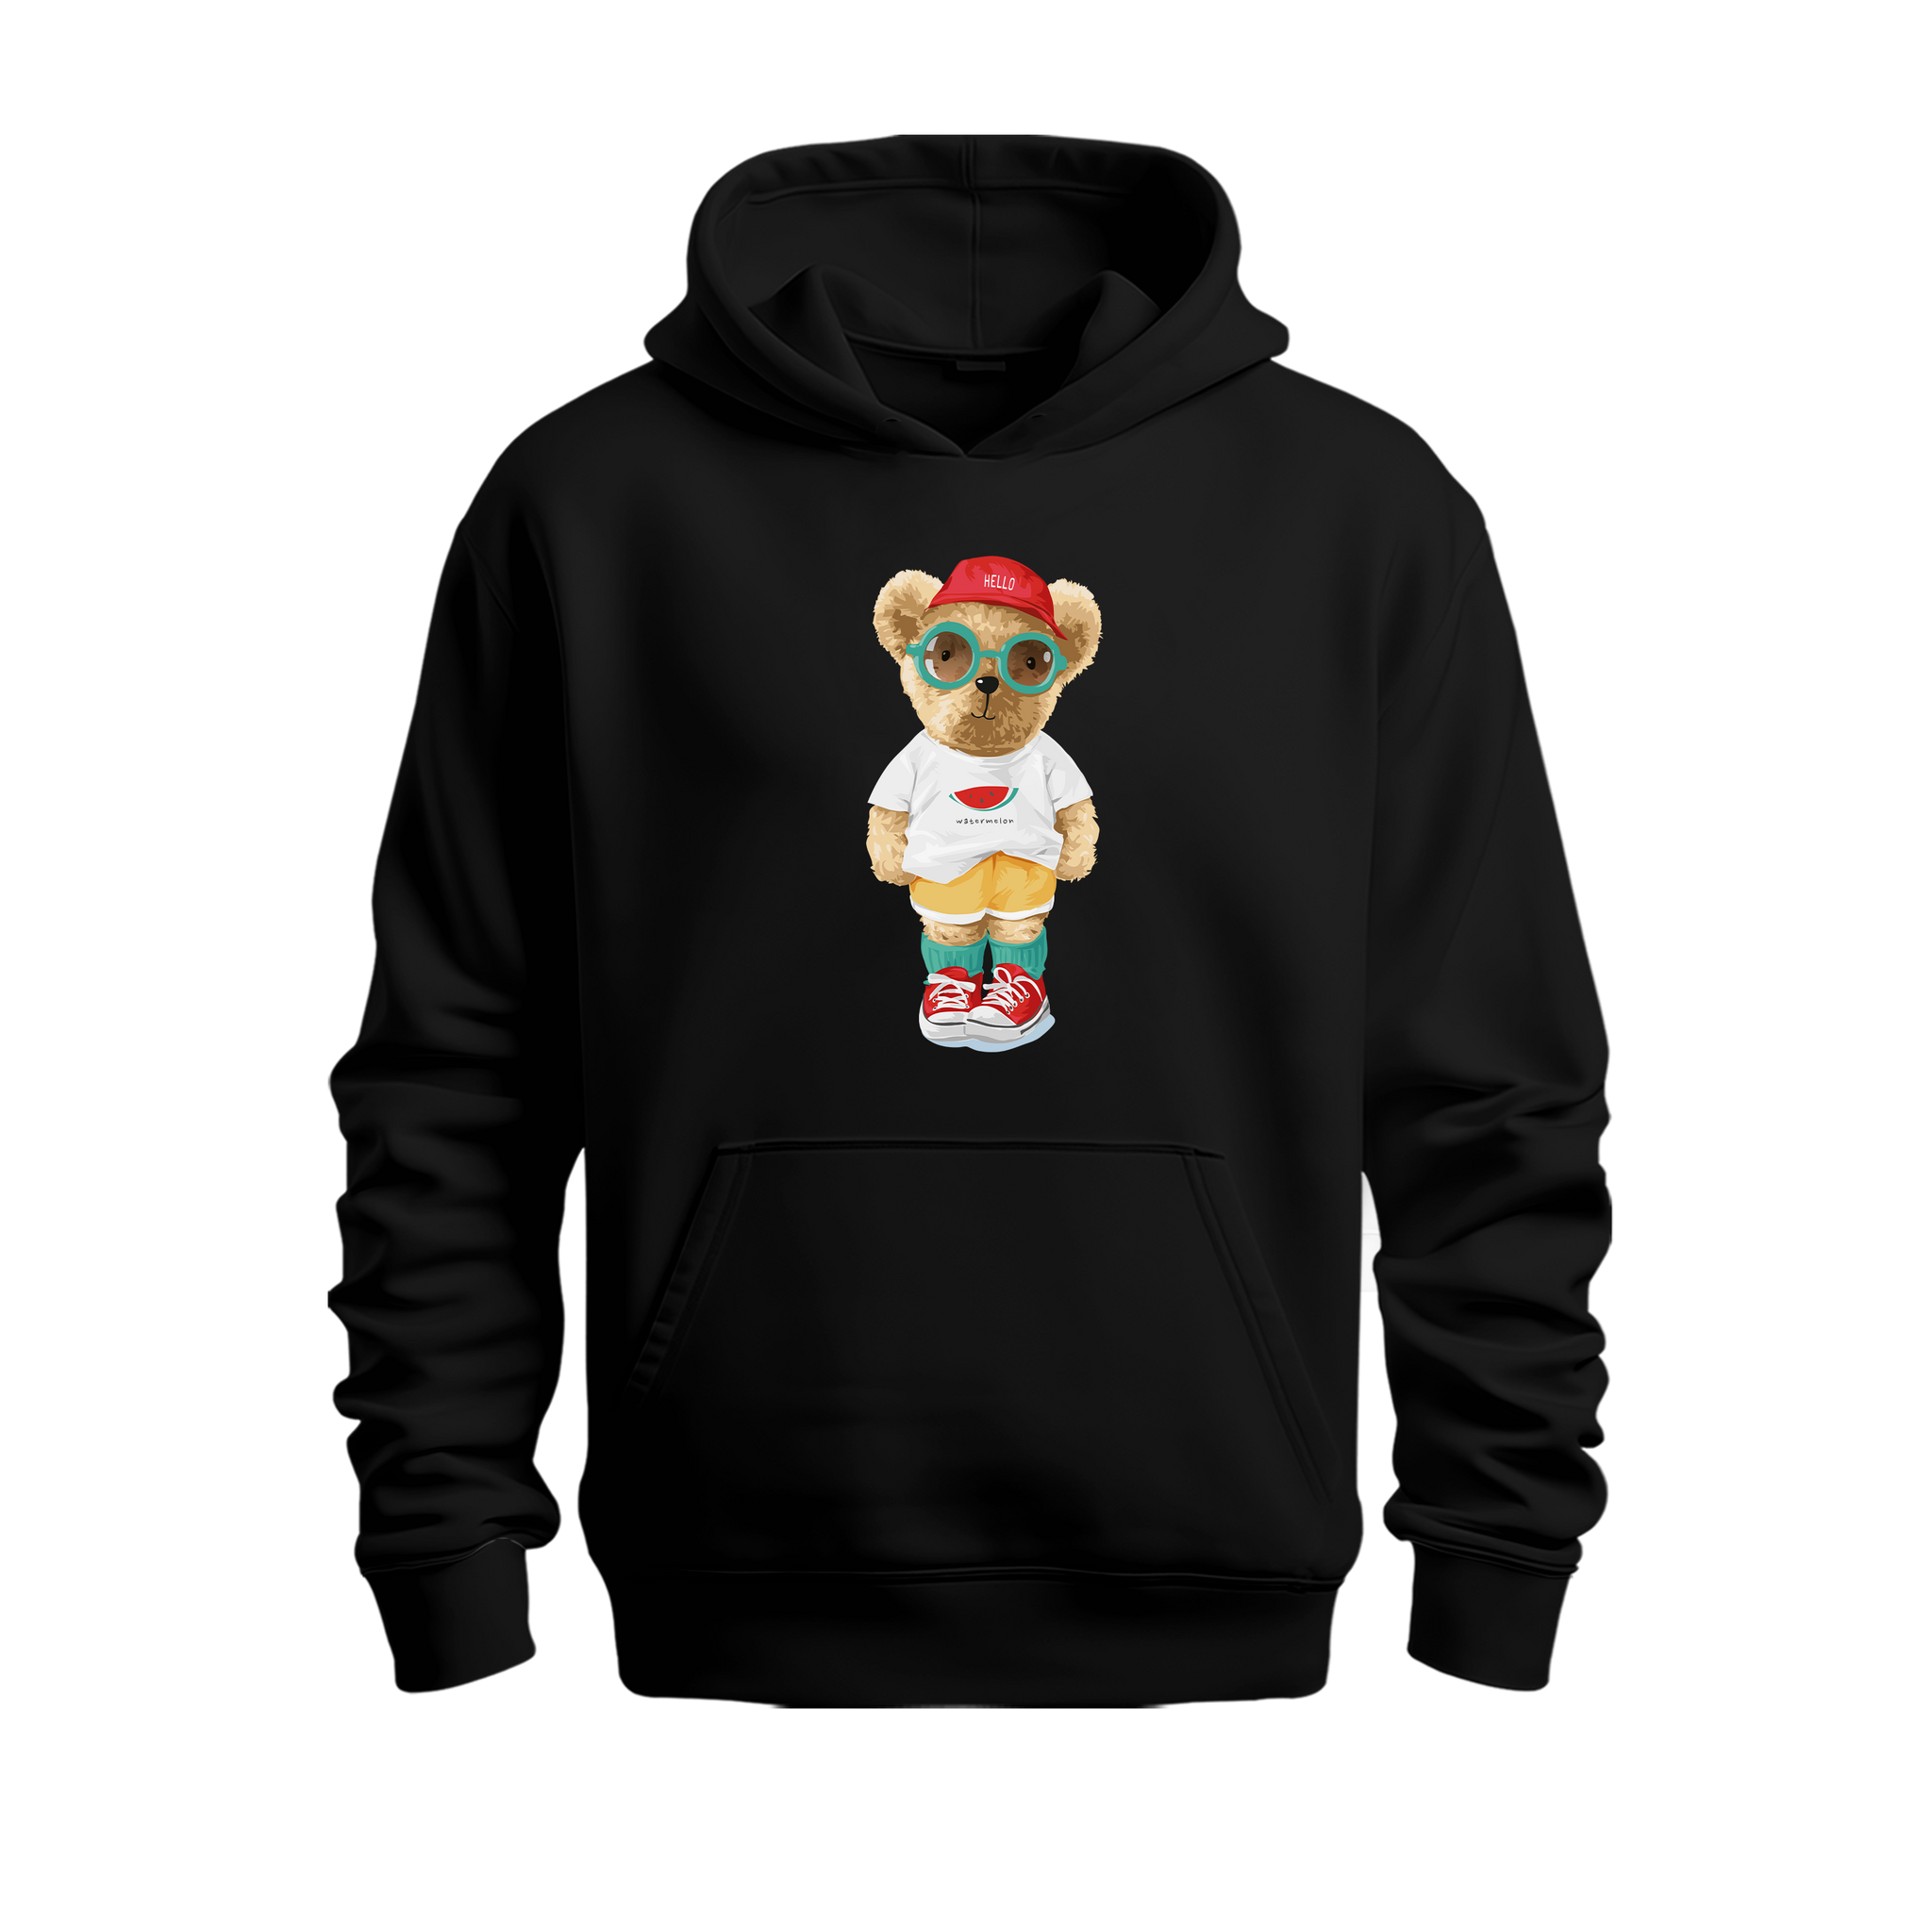 BEAR WITH GLASSES - Hoodie